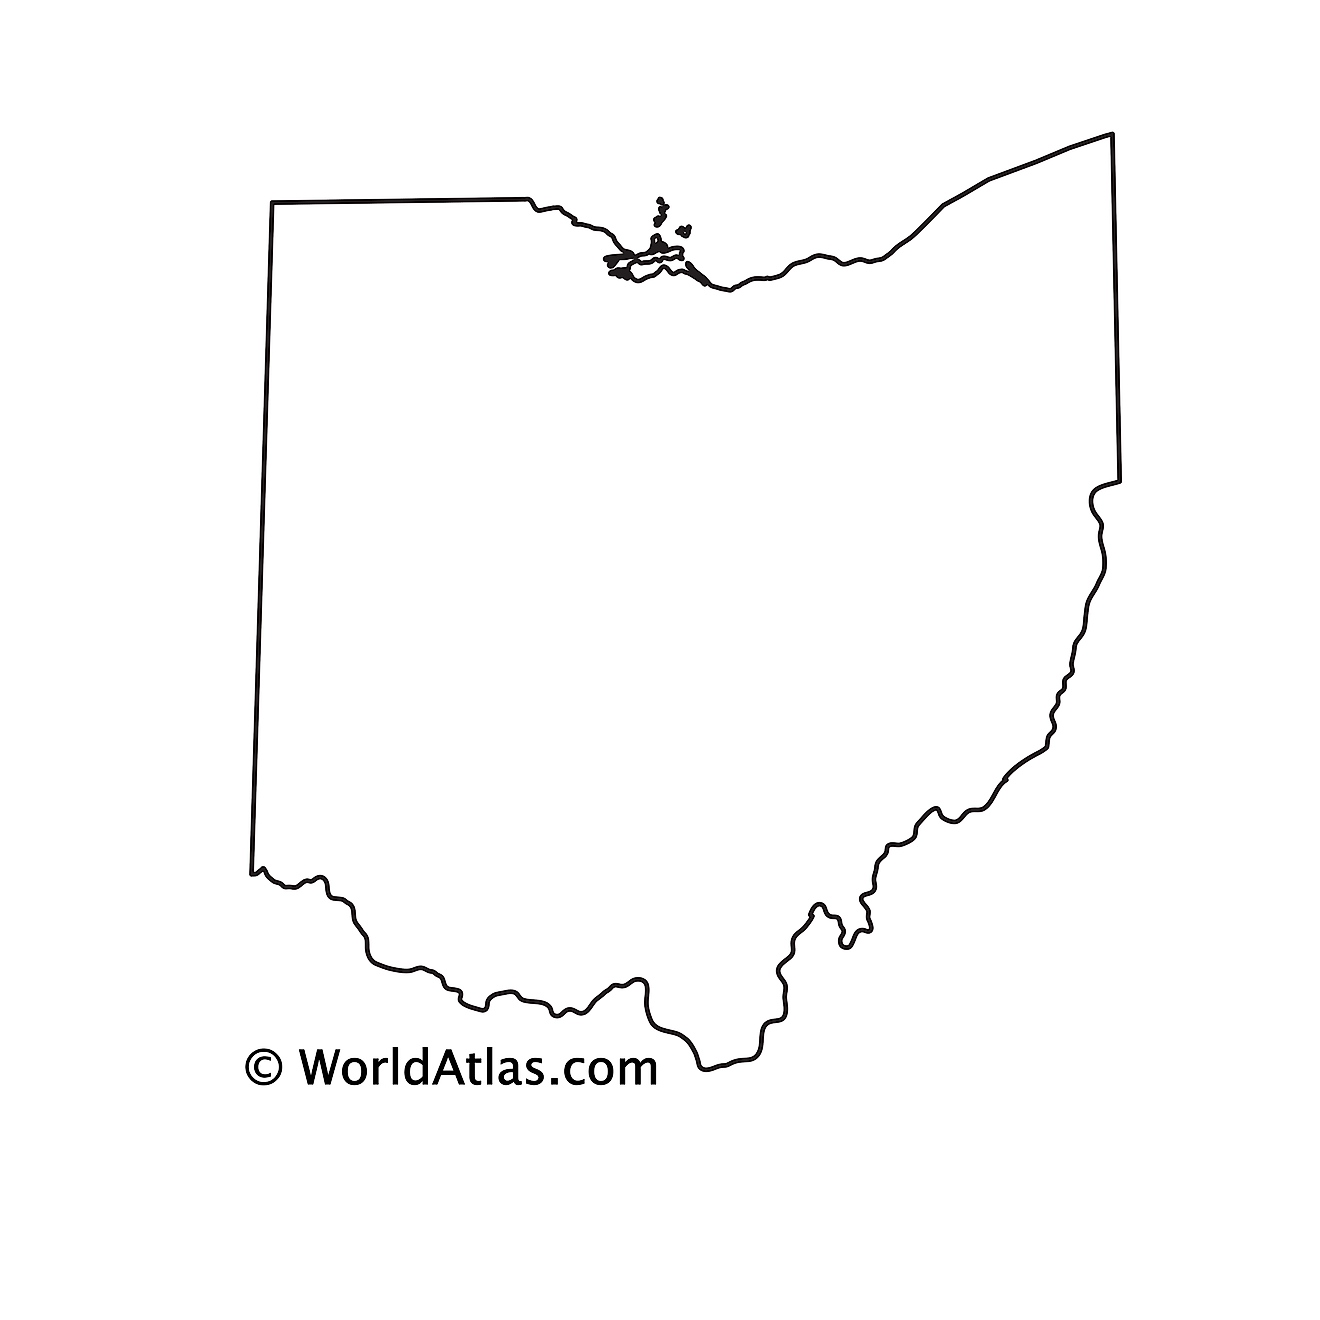 ohio outline png